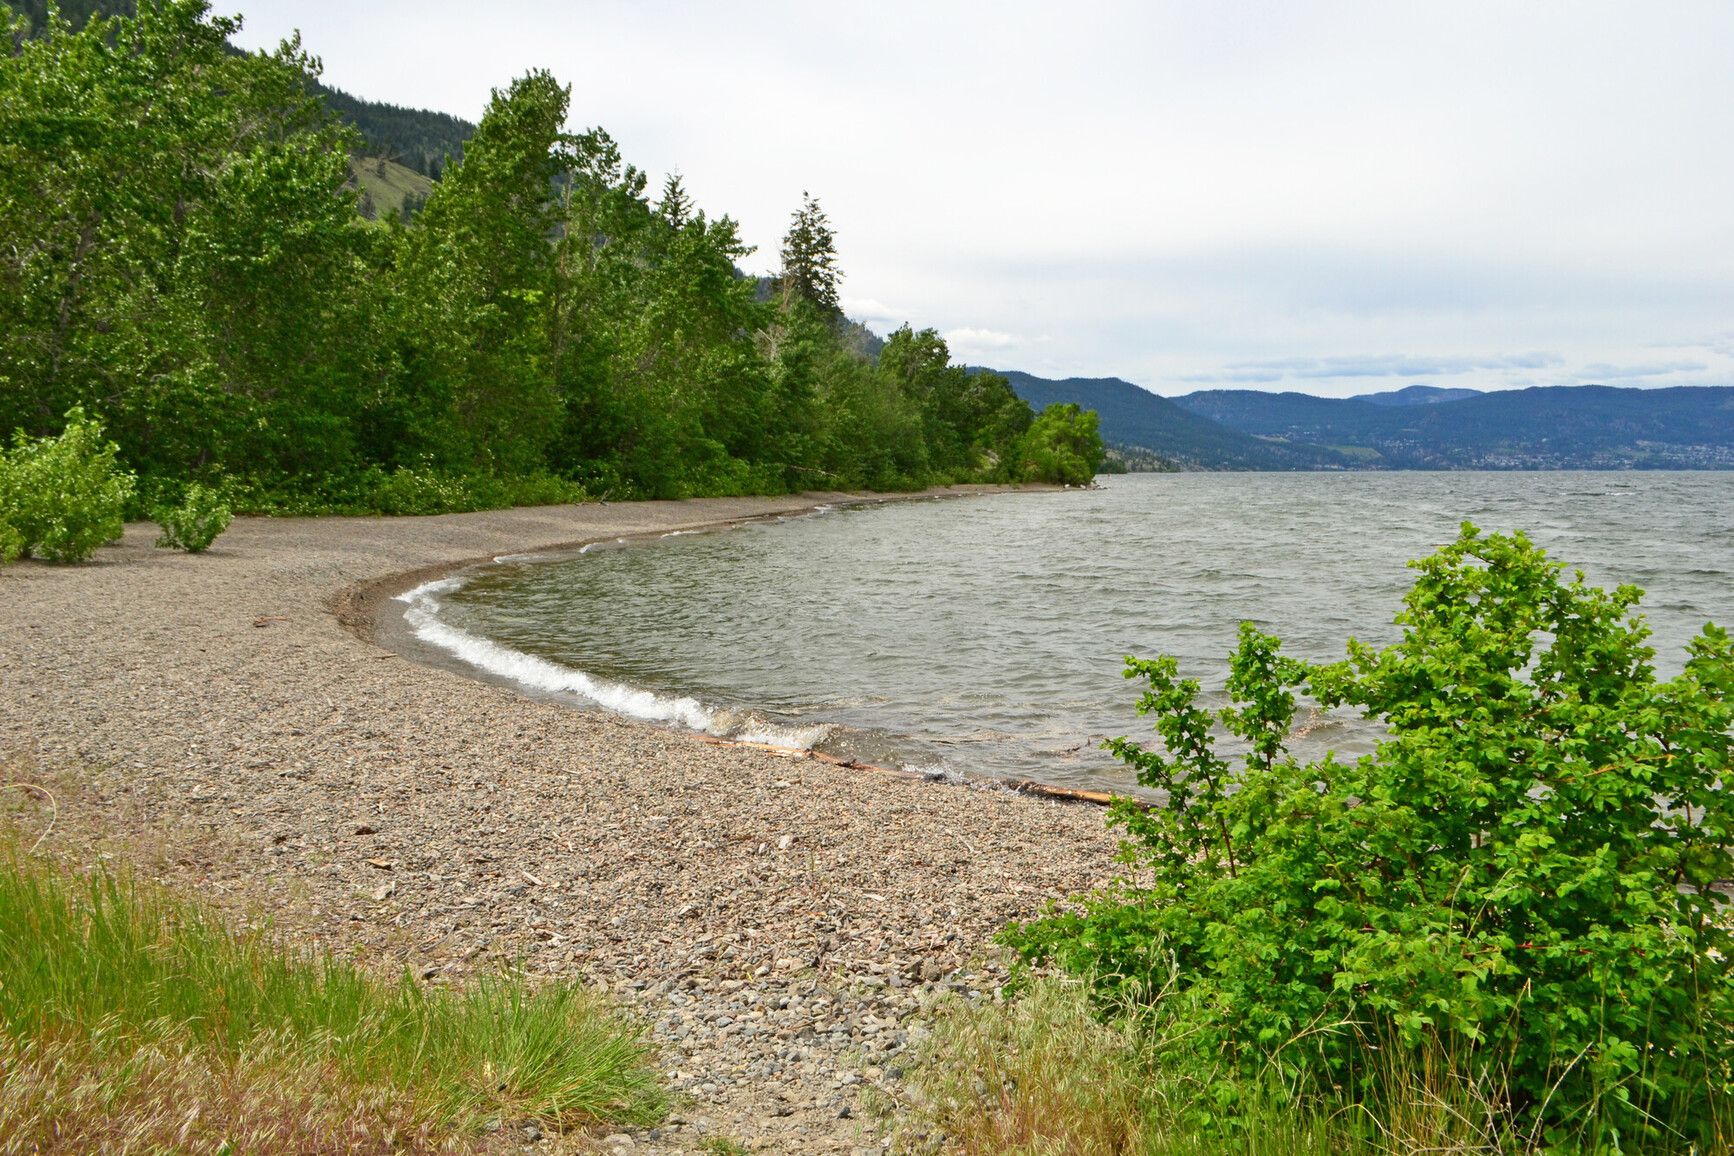 Forest-covered mountains around a beach in Okanagan Lake Park.